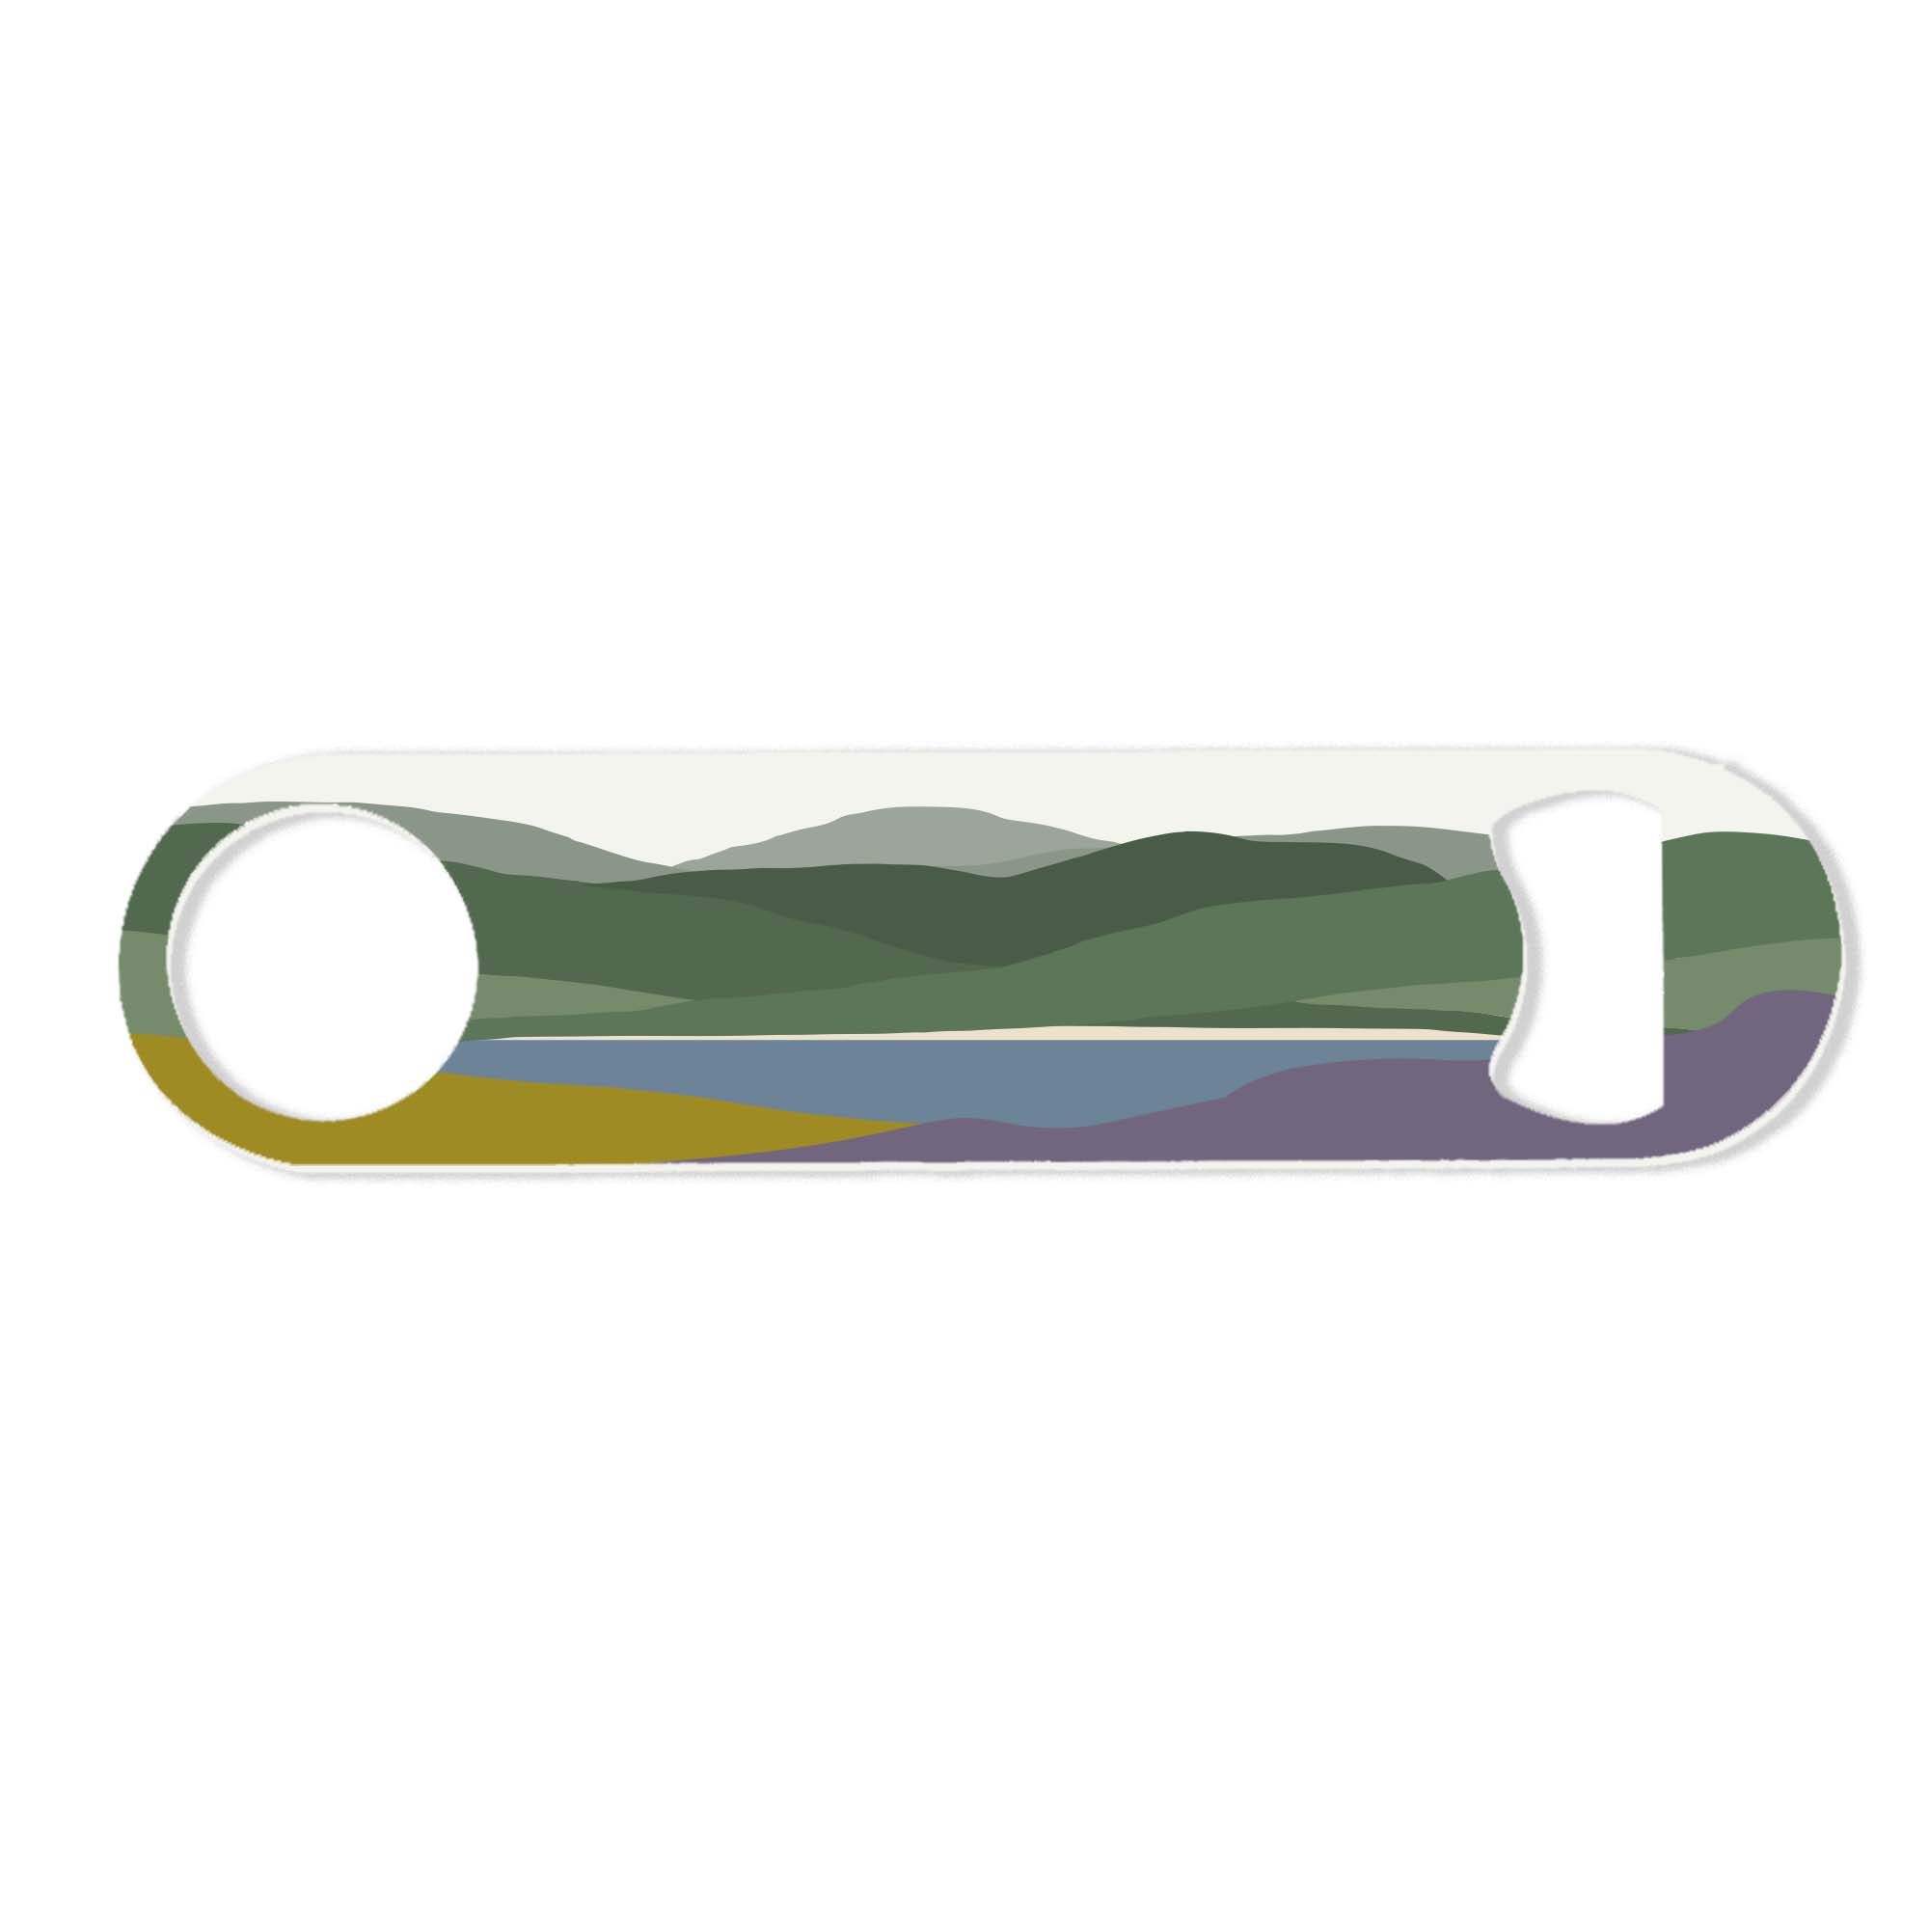 Welsh Hills Heather and Gorse Bottle Opener